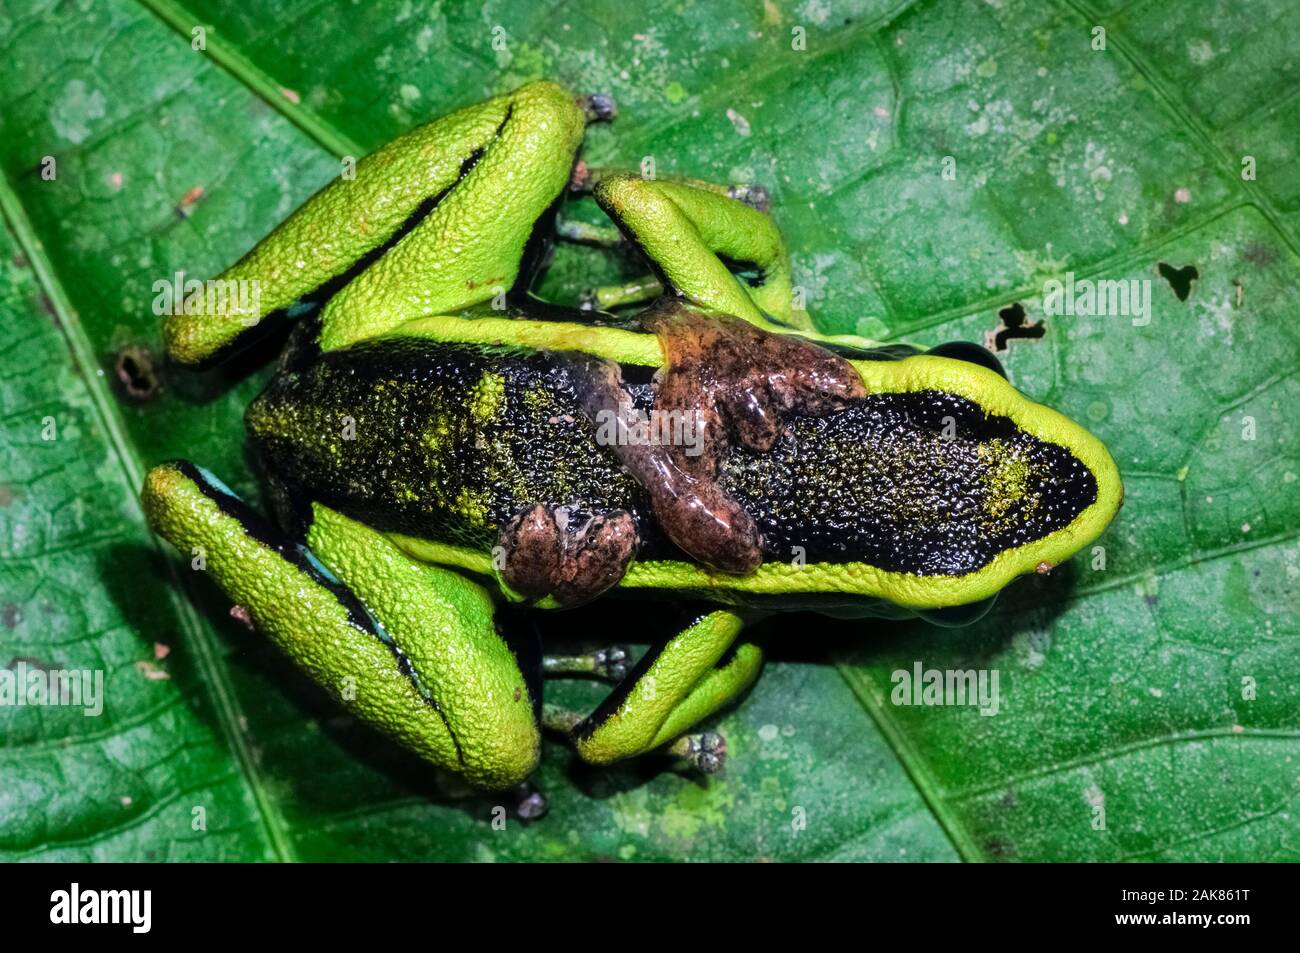 three-striped poison dart frog, Ameerega trivittata, adult male, guarding and carrying tadpoles on its back, Tambopata National Reserve, Madre de Dios Stock Photo